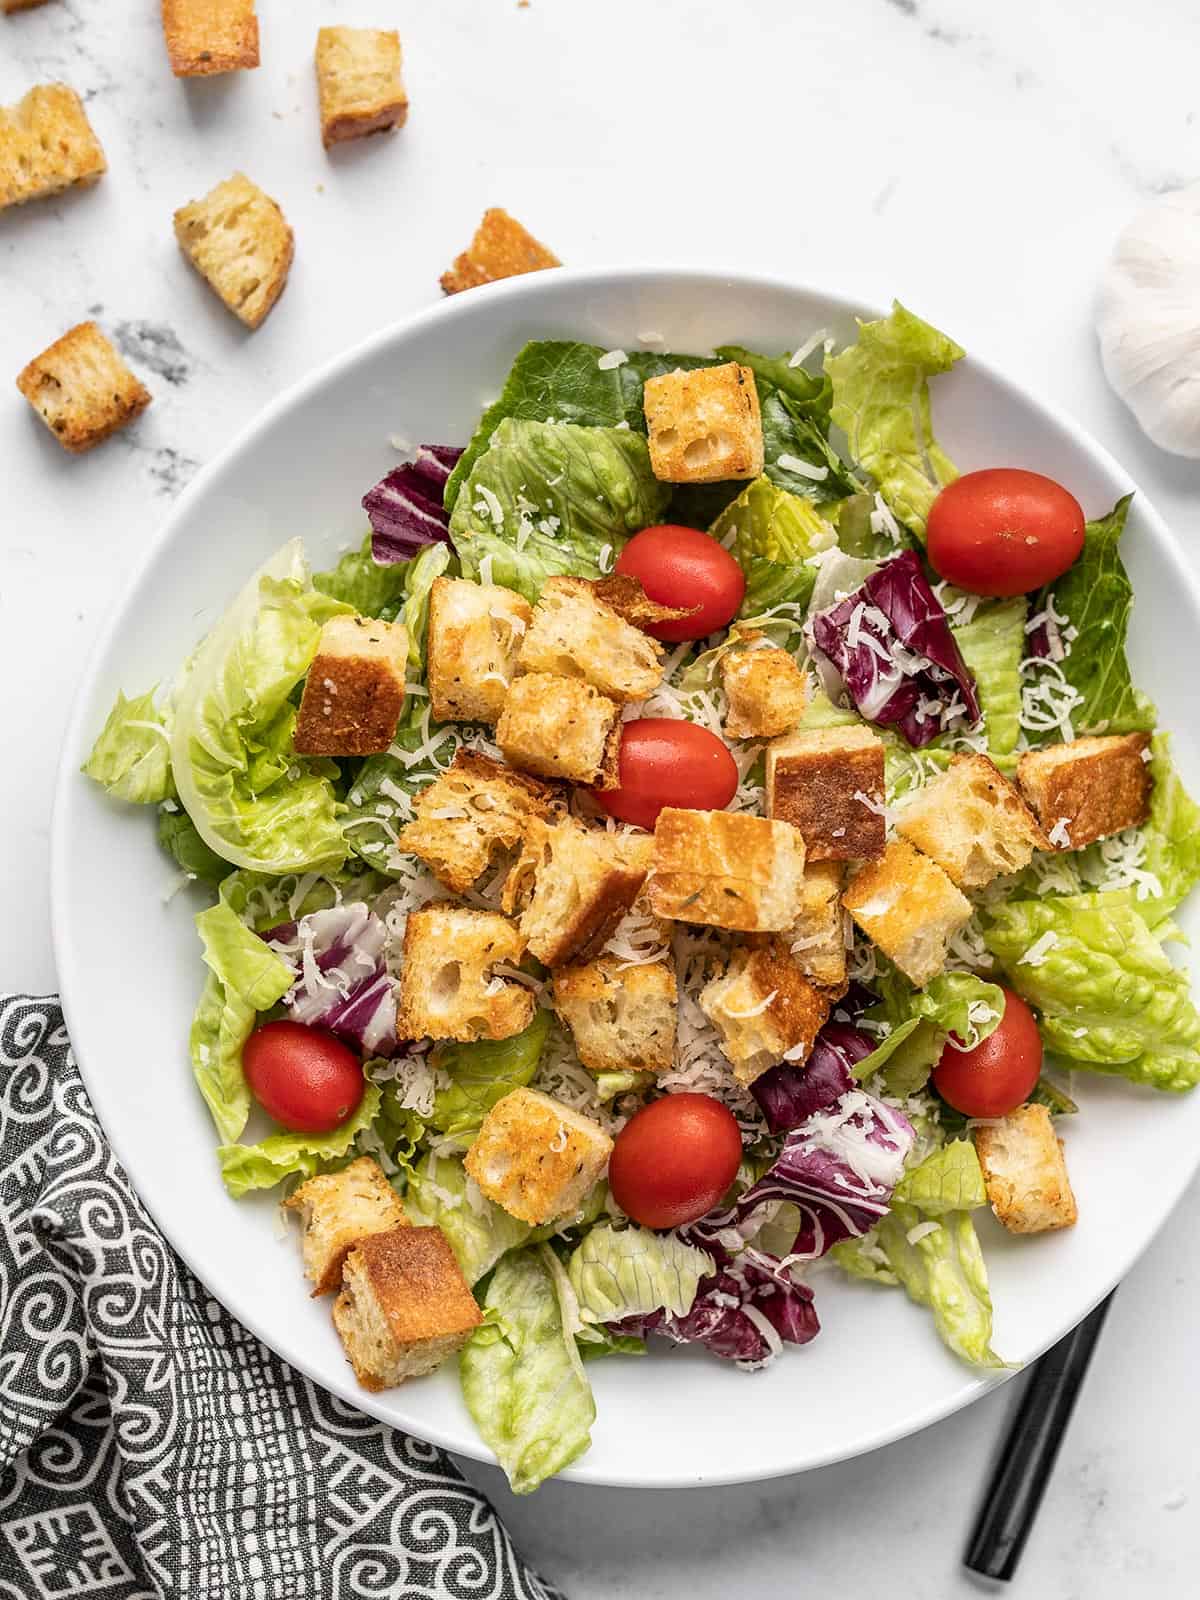 Overhead view of a salad topped with homemade croutons.